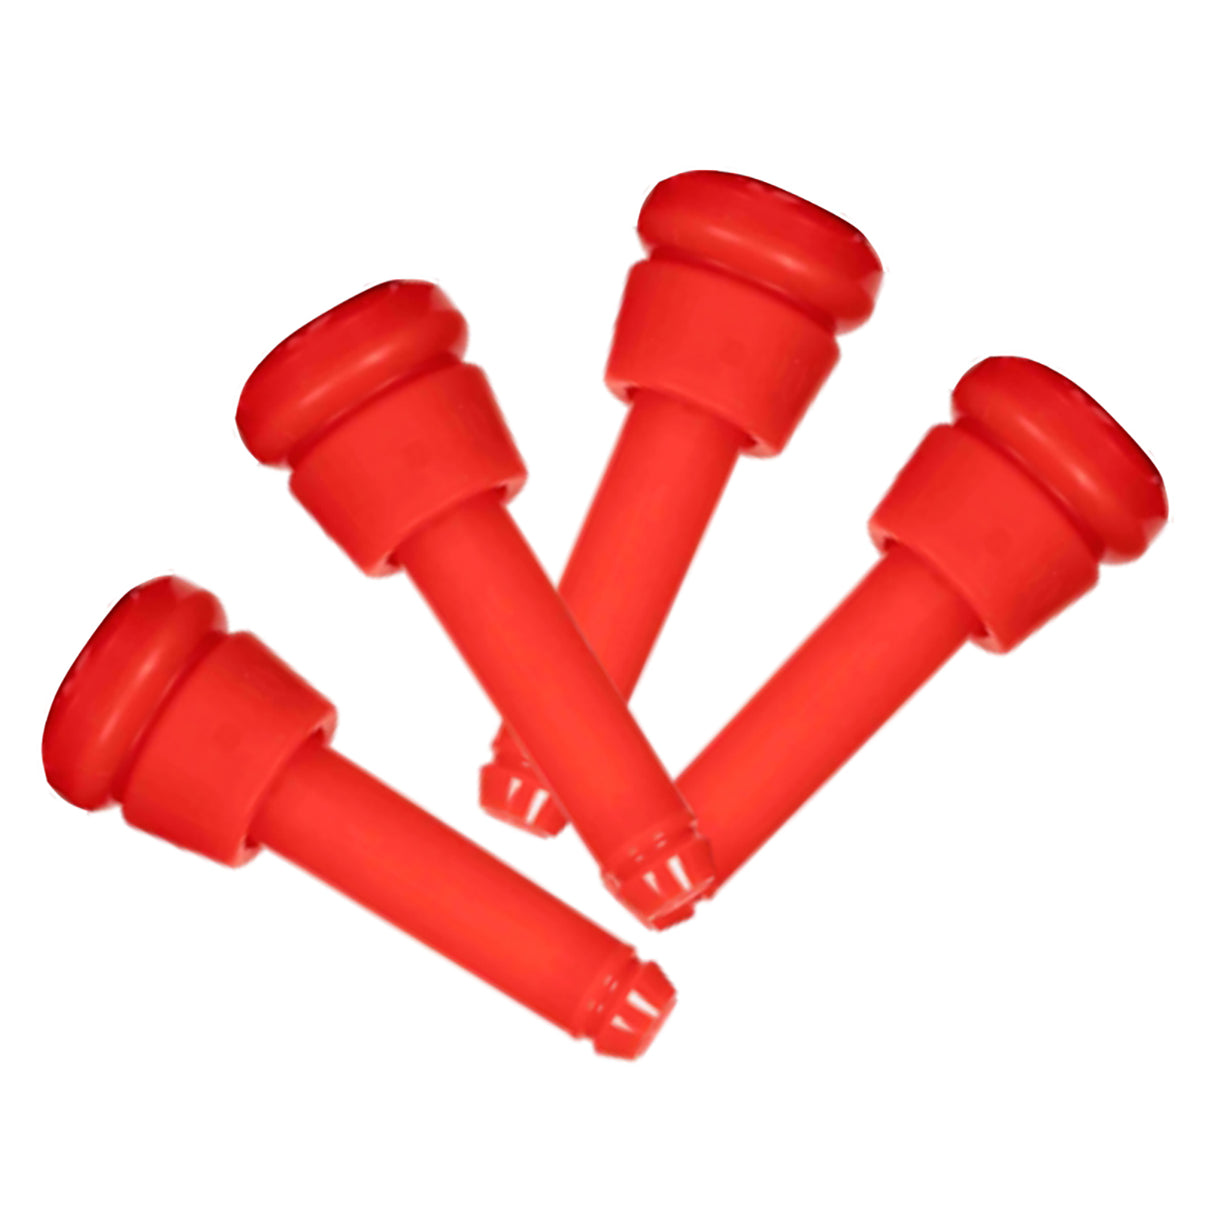 Liner silicone red 21mm